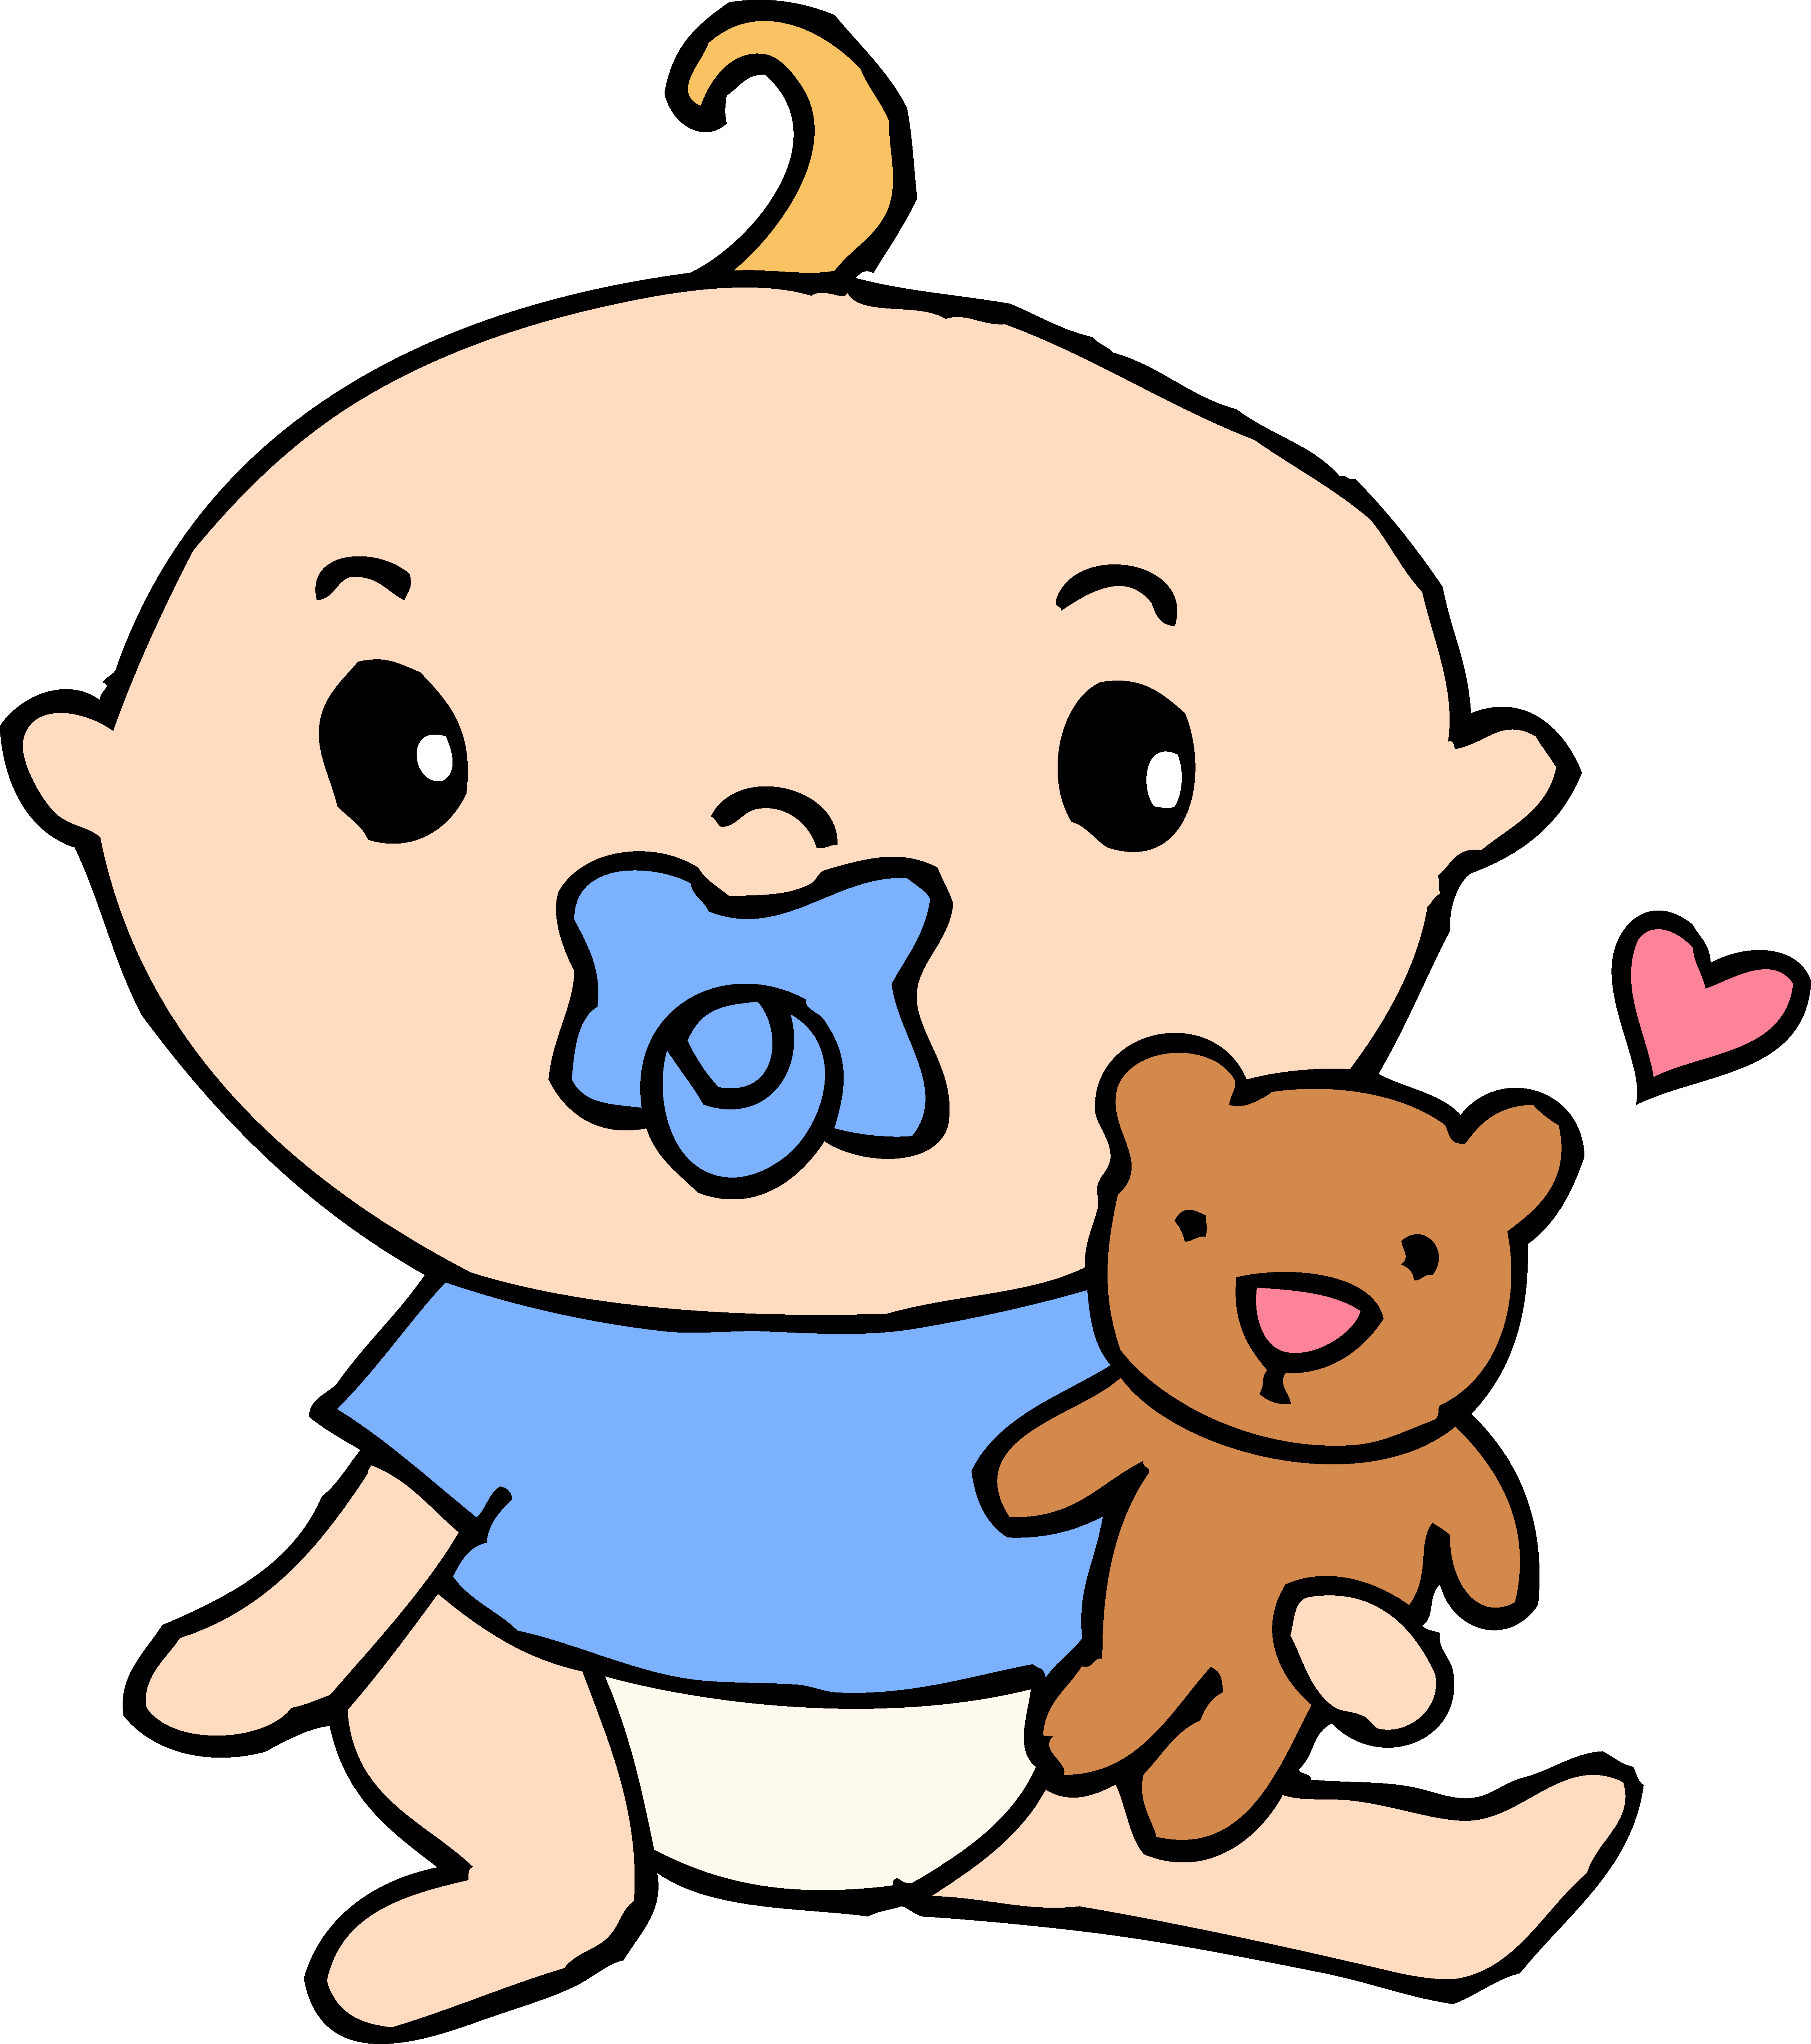 Baby clip art images